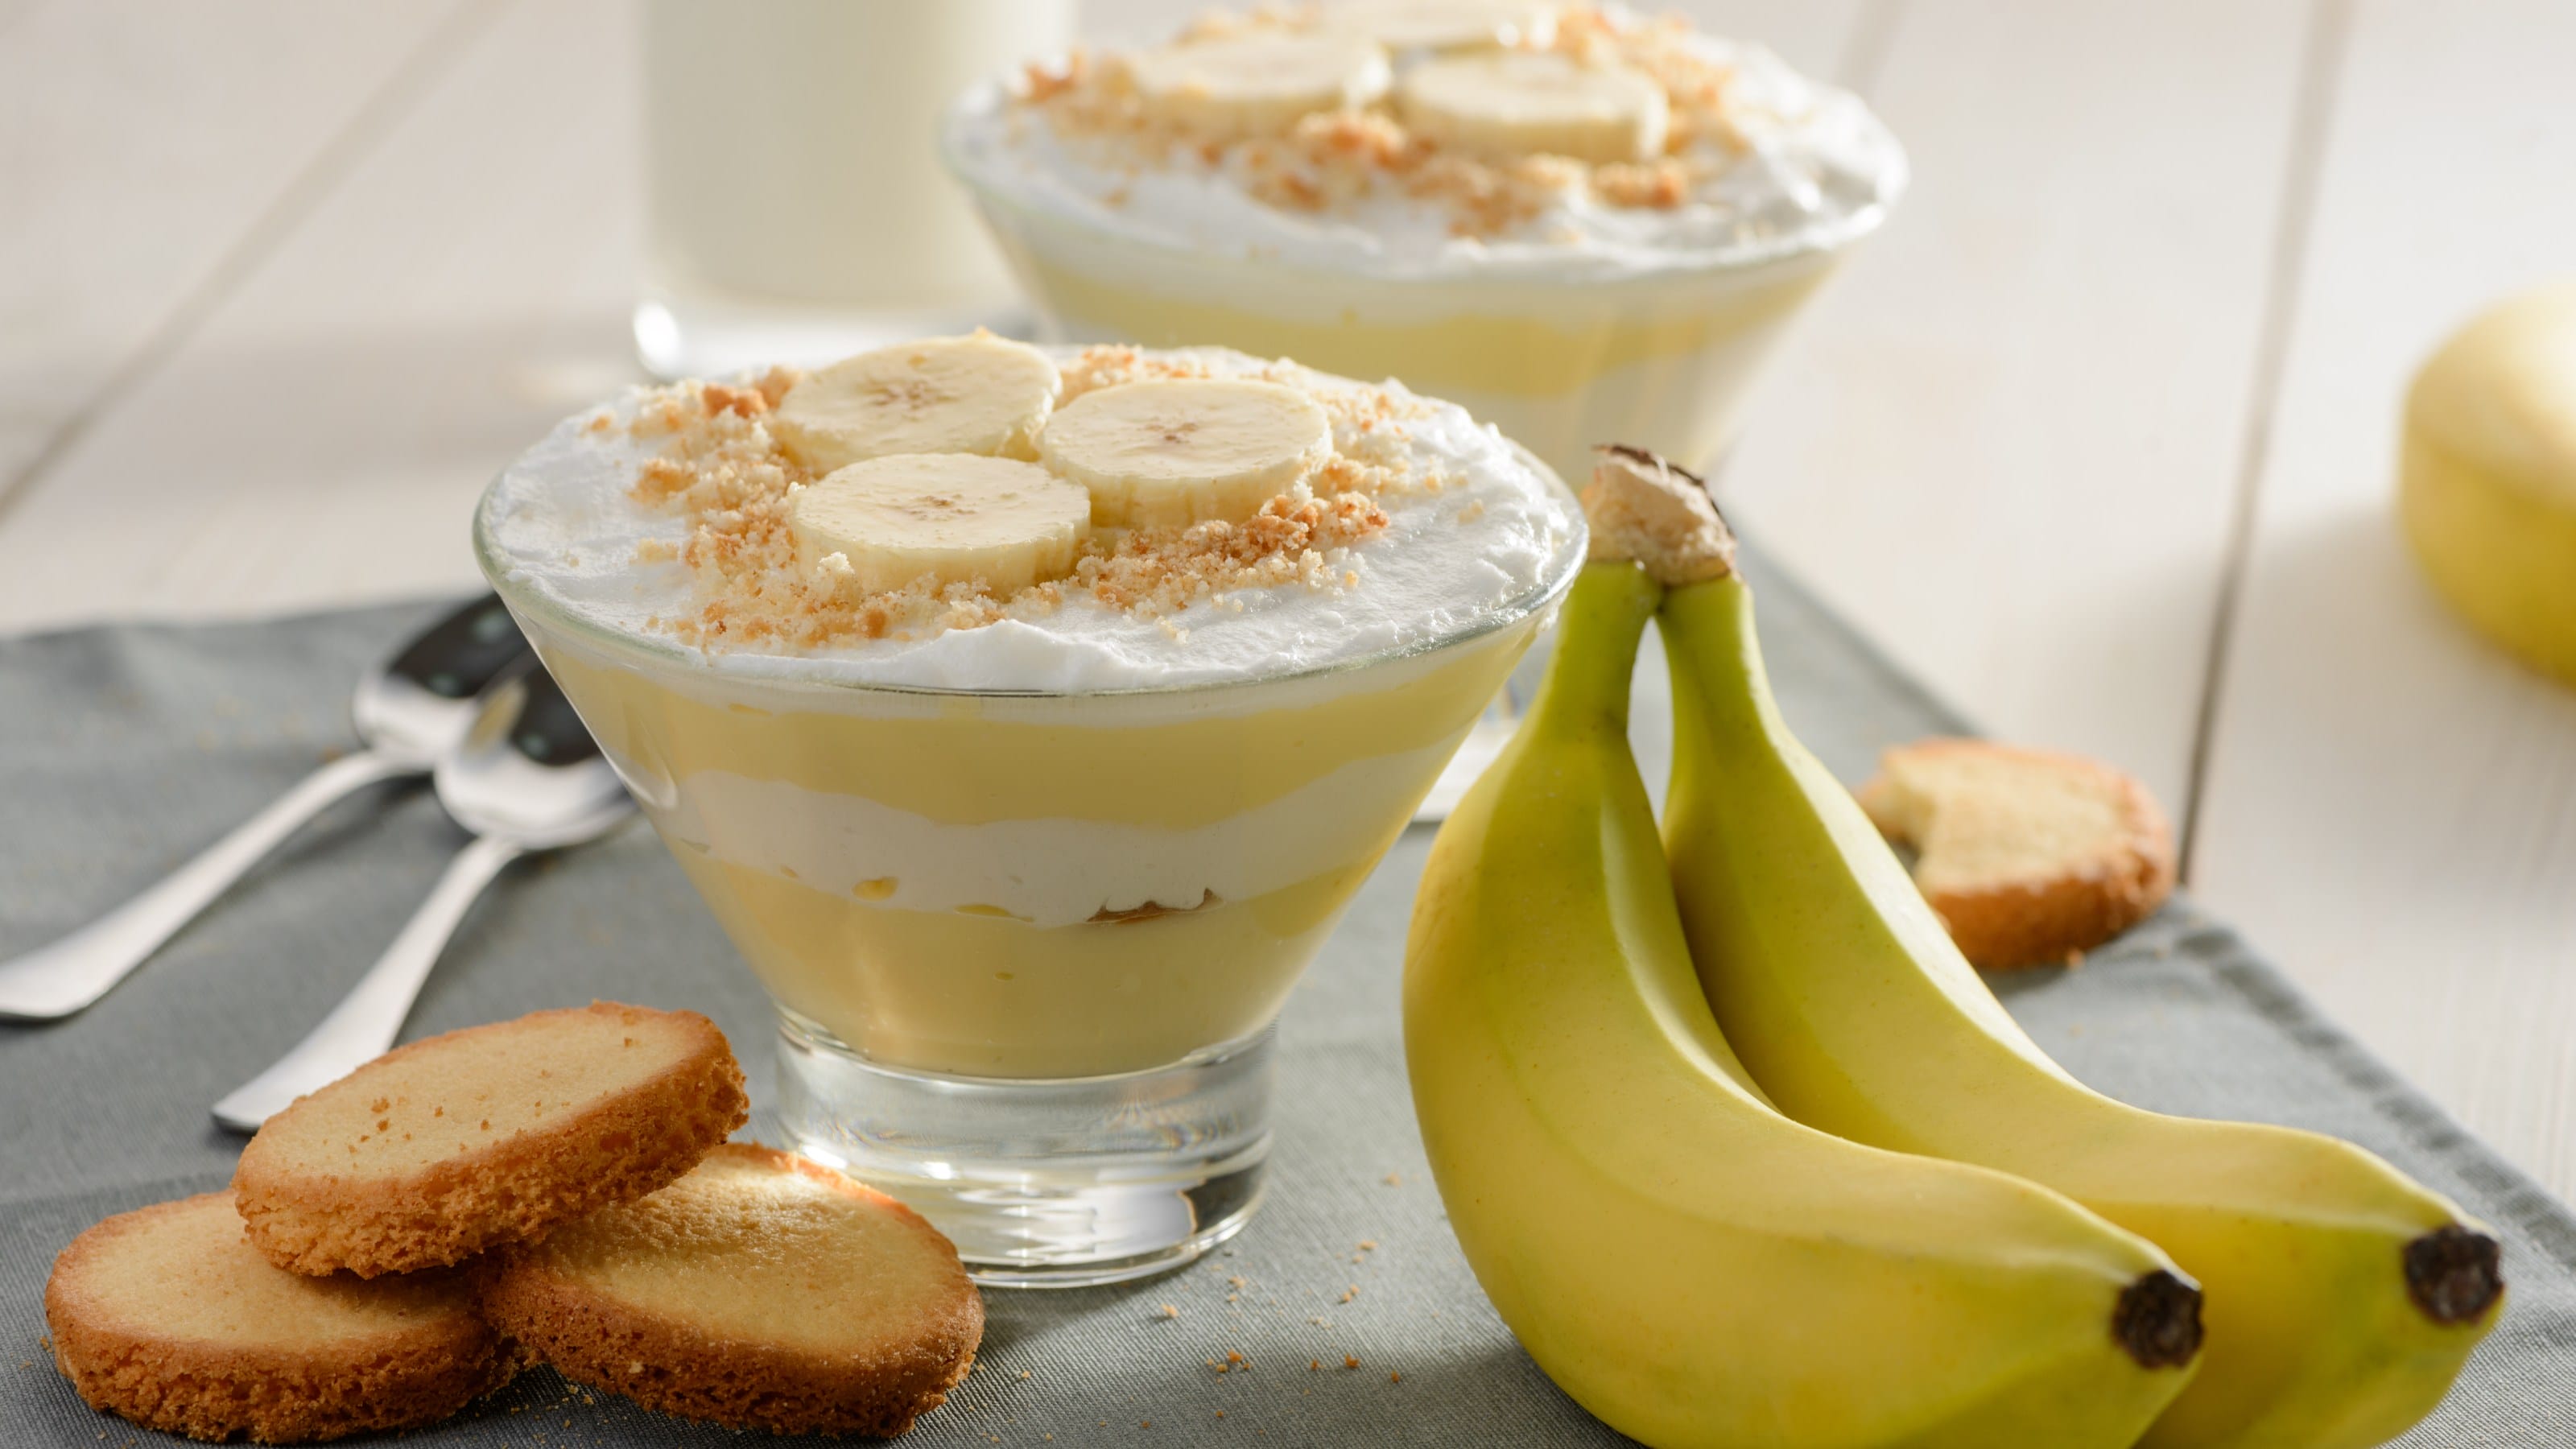 Cream pudding with banana and crumbed cookie.